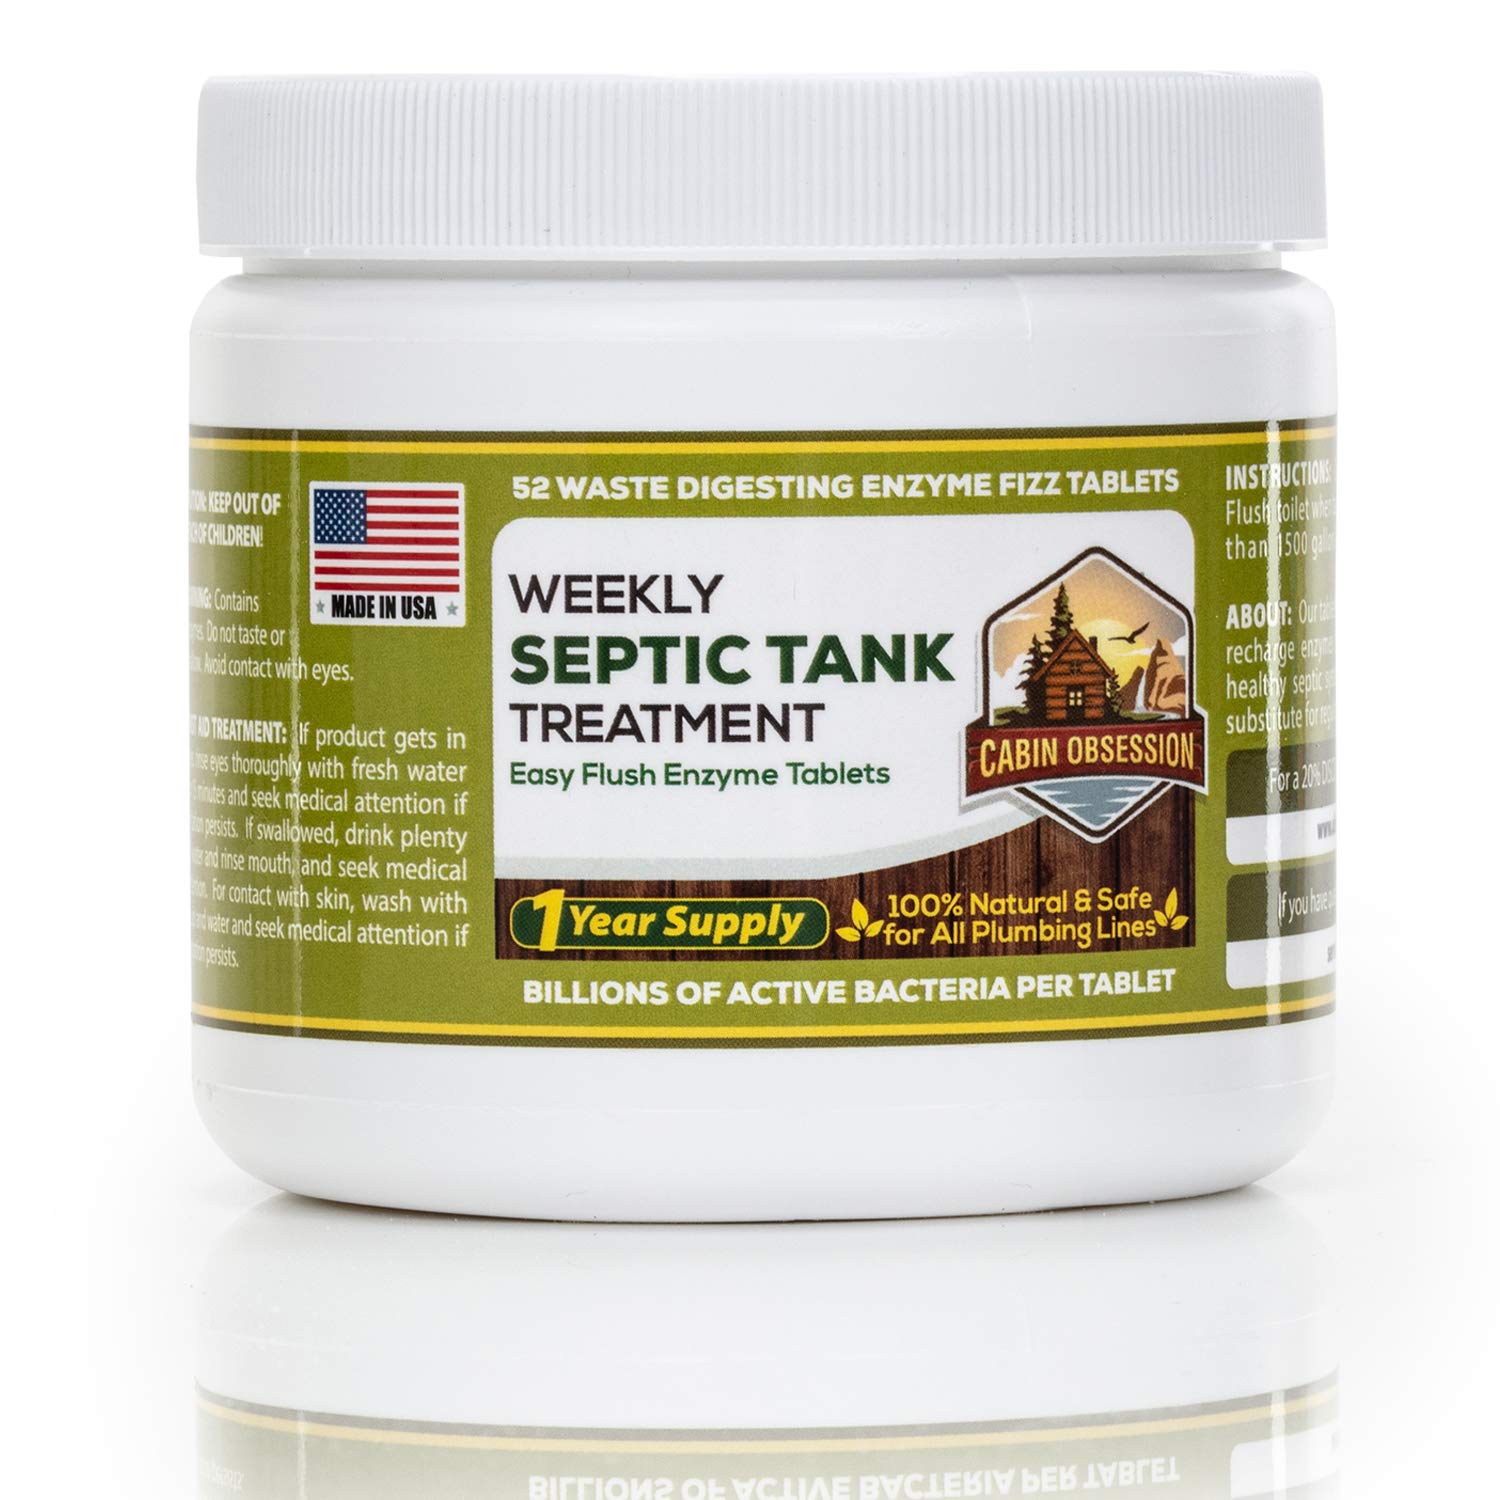 52 Weekly Septic Tank Treatment Fizz Tablets – Easy Flush Bio Toilet Tabs with Billions of Active Bacteria per Tablet – 1 Year Supply - 100% Natural & Safe for All Plumbing & Drain Lines…